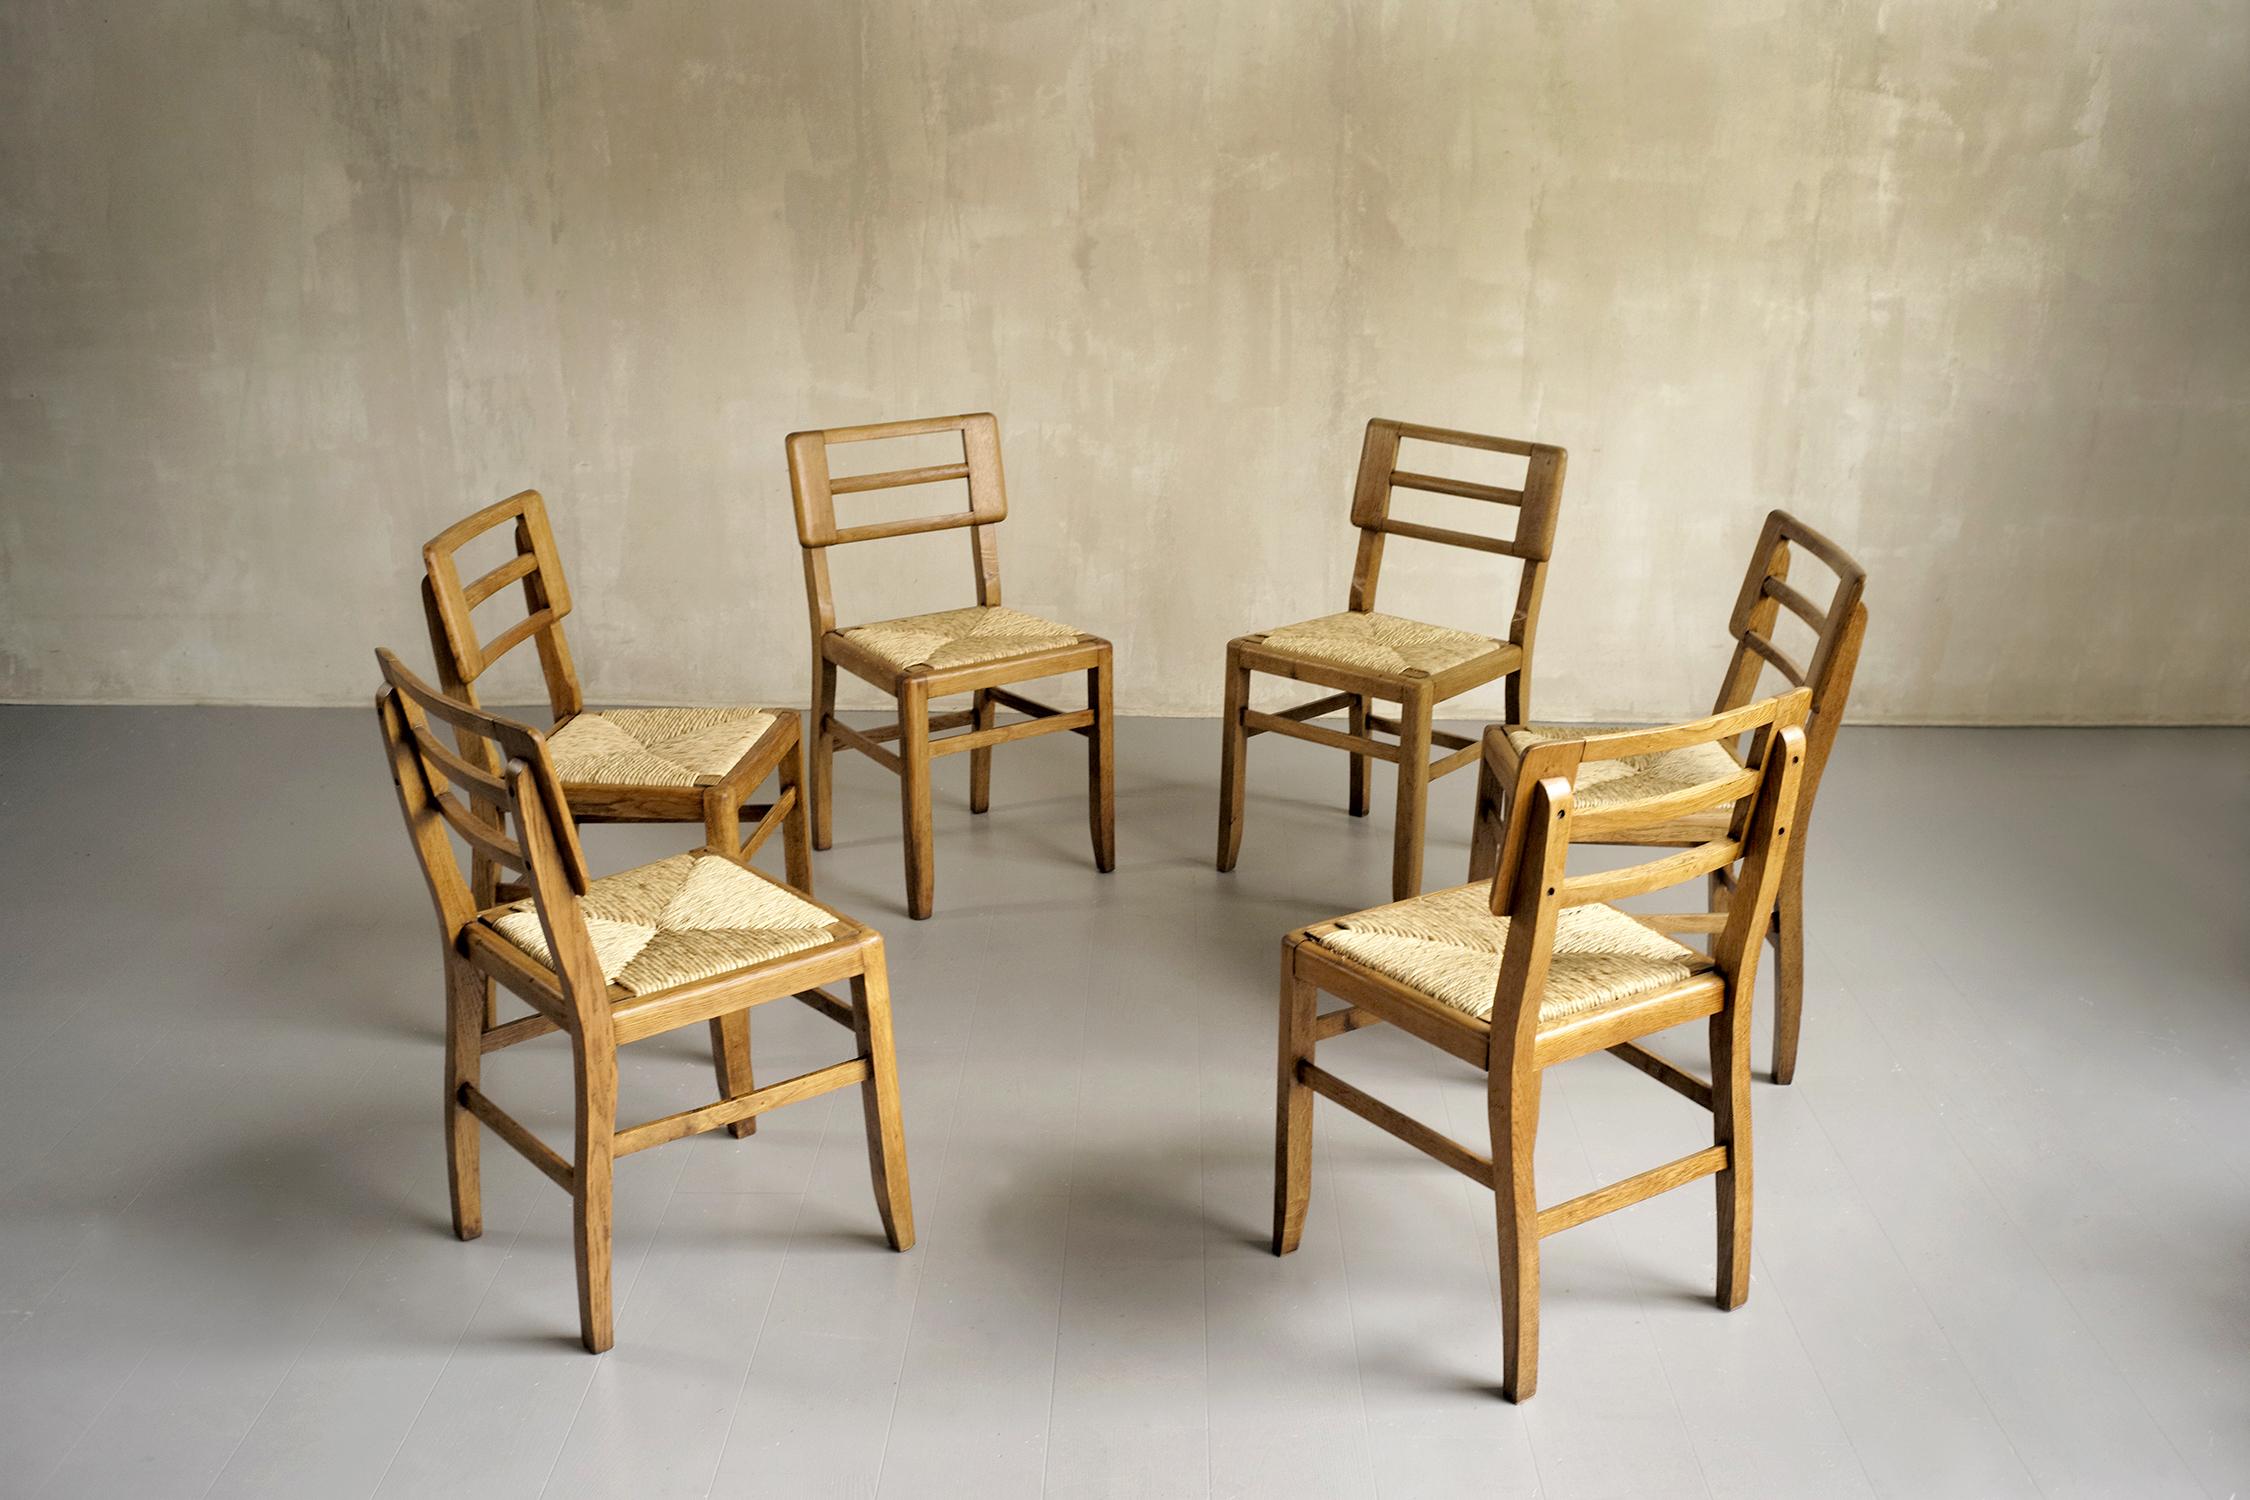 Pierre Cruège, Set of 6 Straw Chairs, France, 1950 For Sale 4